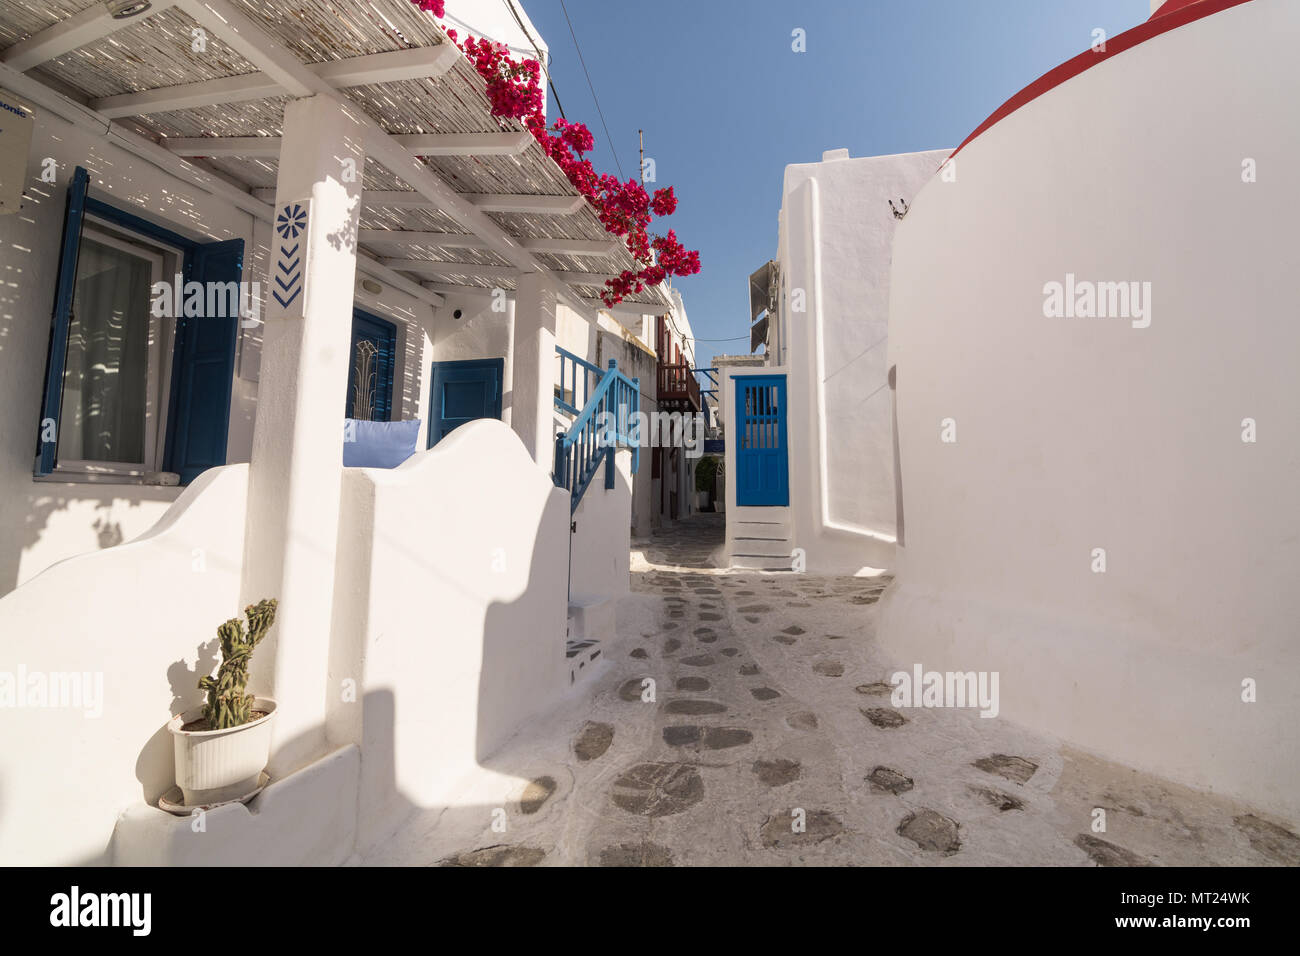 MYKONOS, GREECE - MAY 2018: View over the old street in Mykonos town district Little Venice with stony pavement, traditional houses and bush in blosso Stock Photo